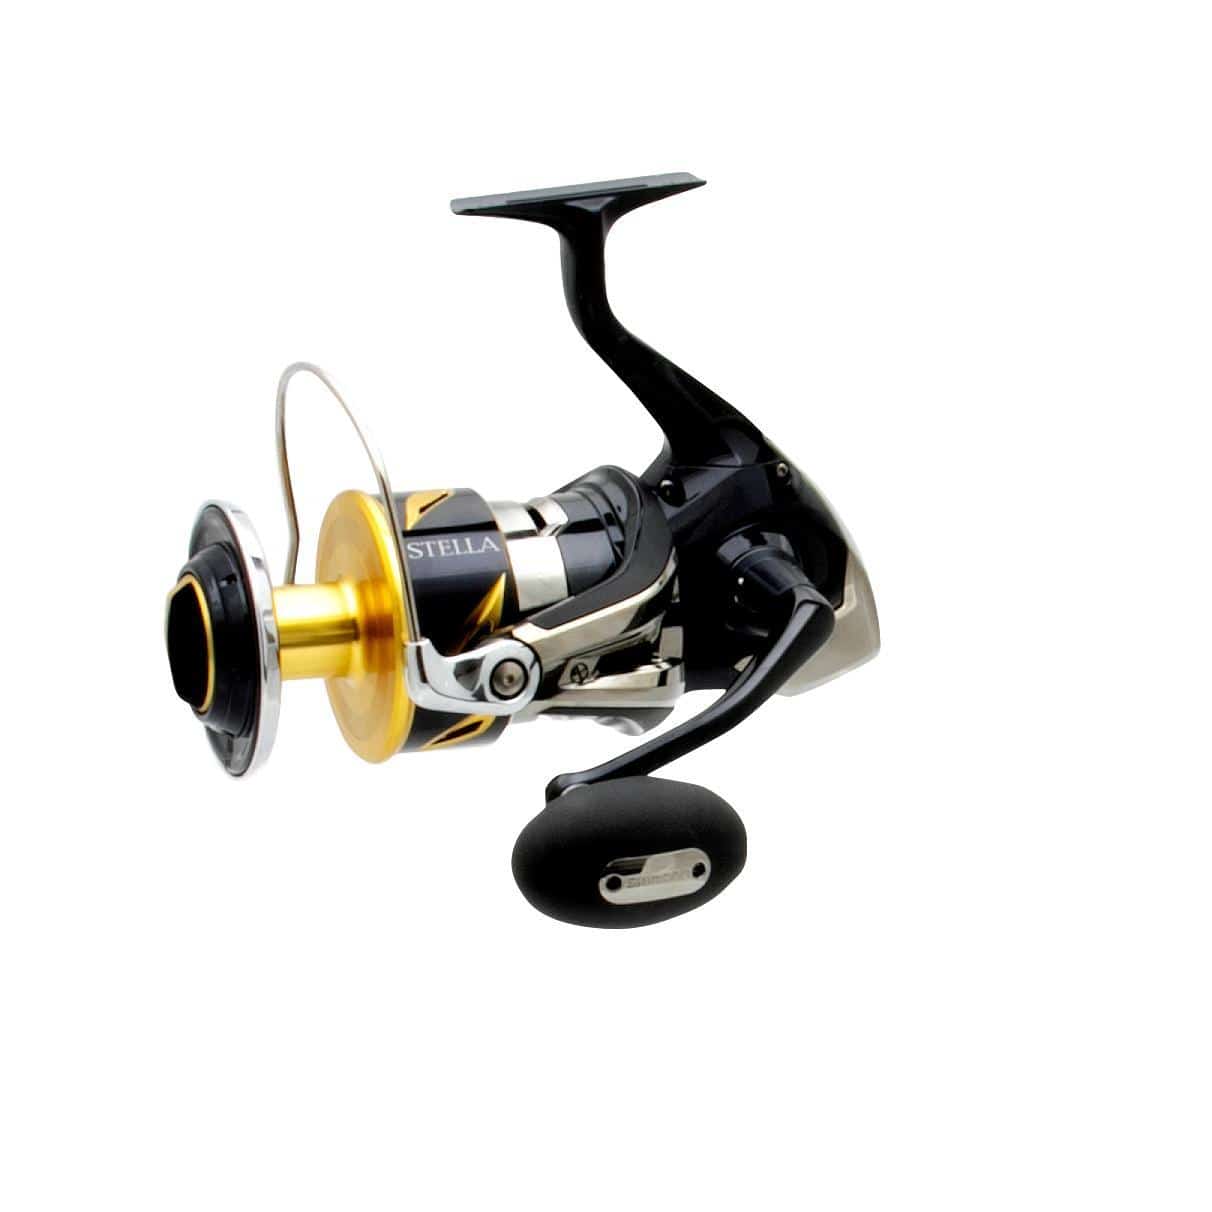 shimano stella 20000 products for sale